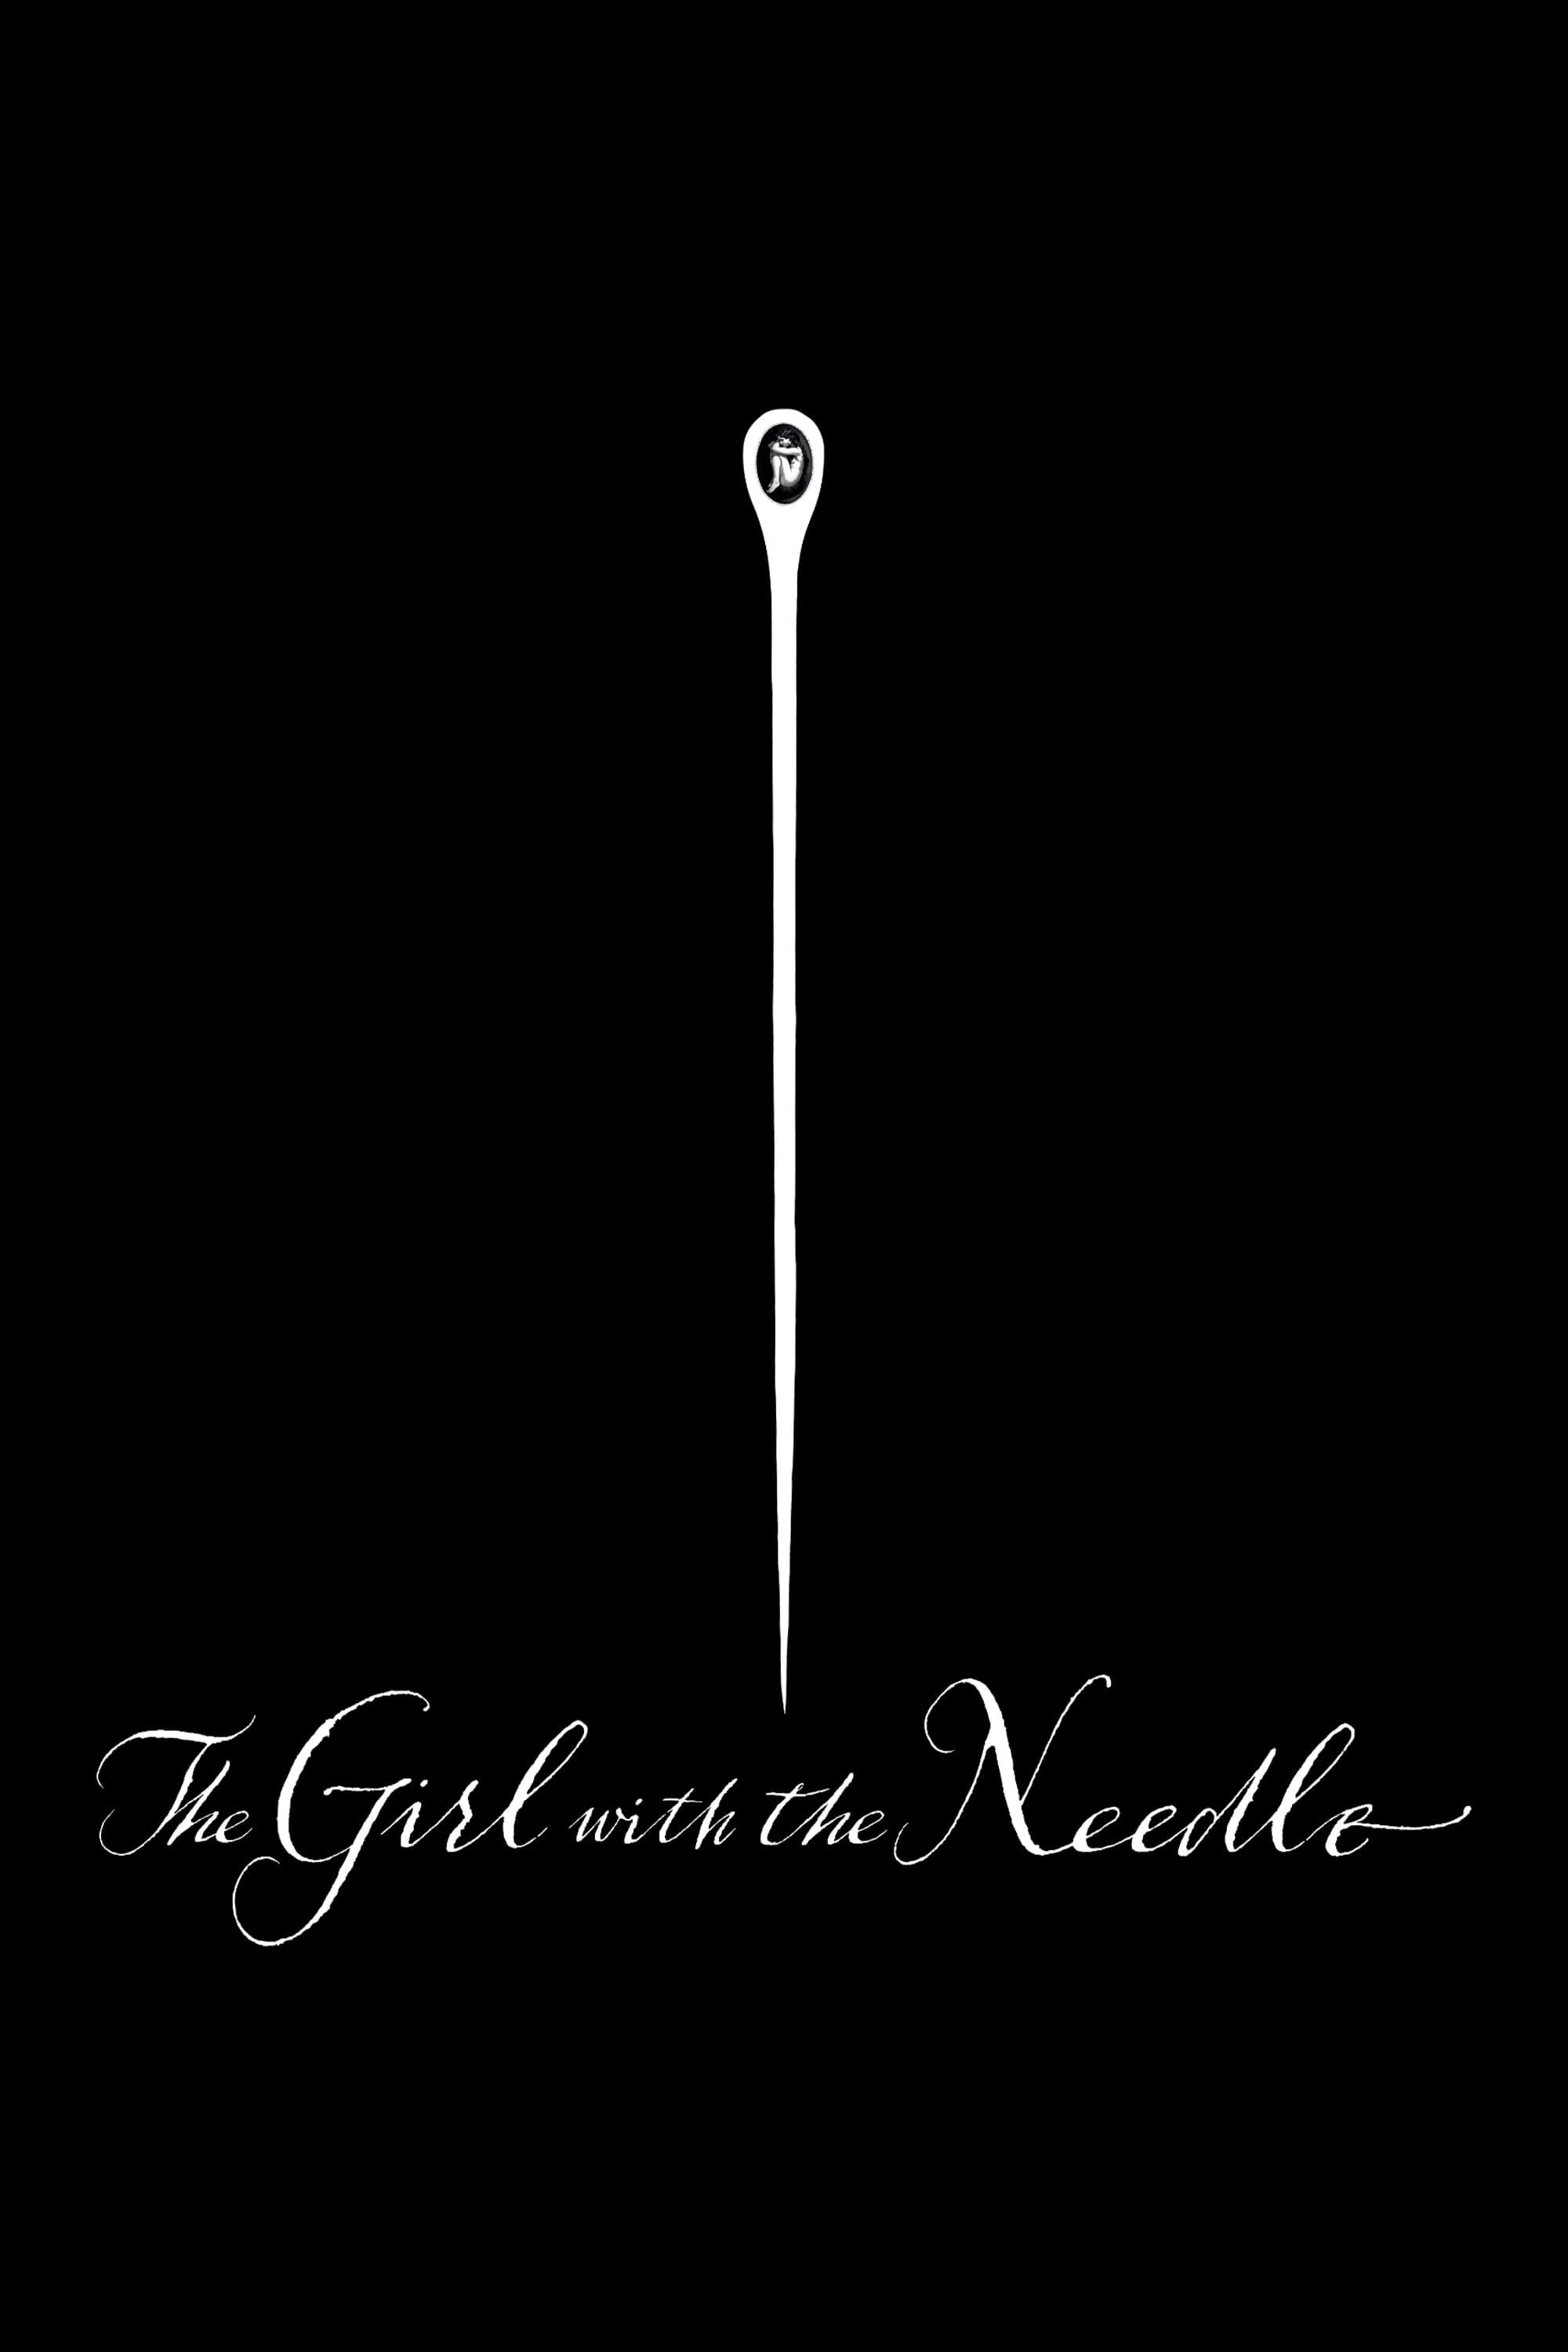 The Girl with the Needle poster